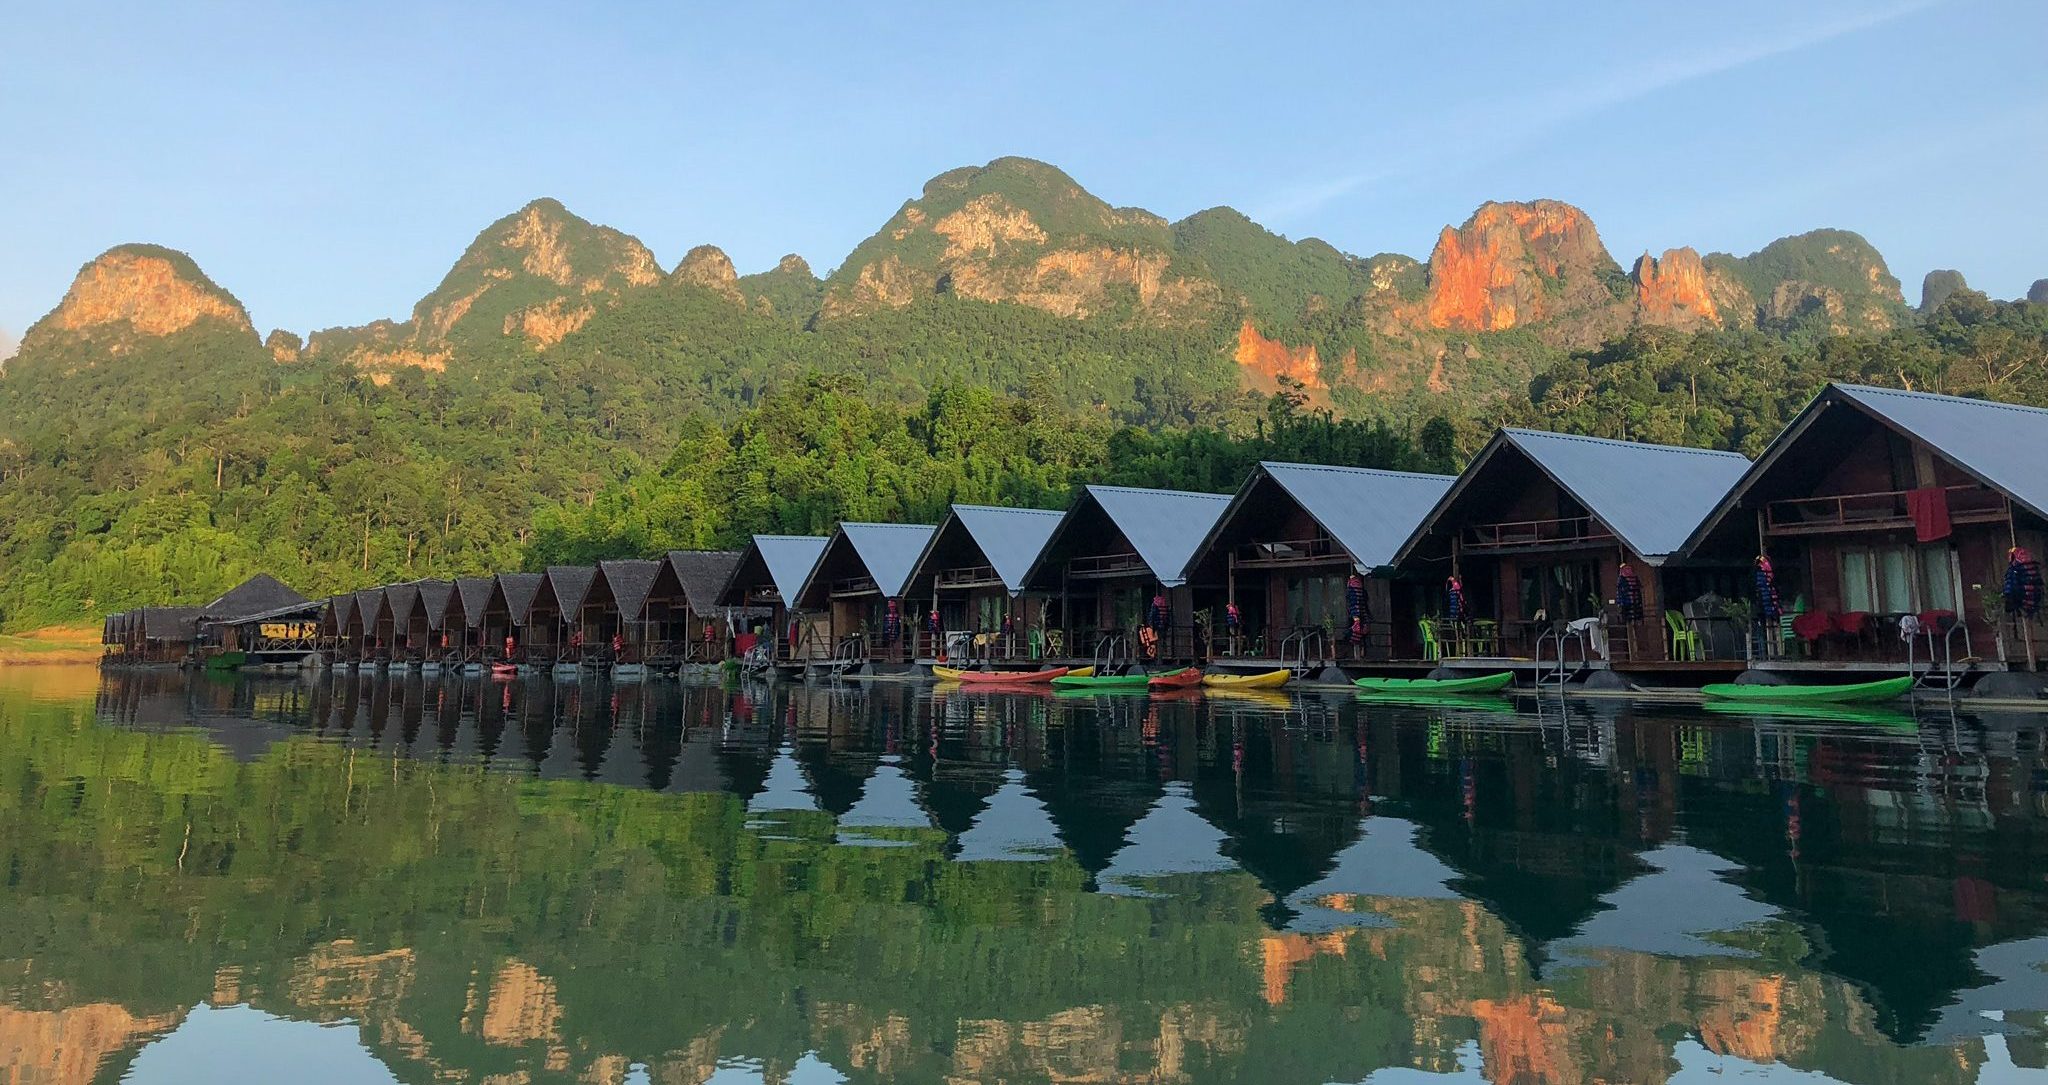 Stay Overnight in a Bungalow in Khao Sok National Park